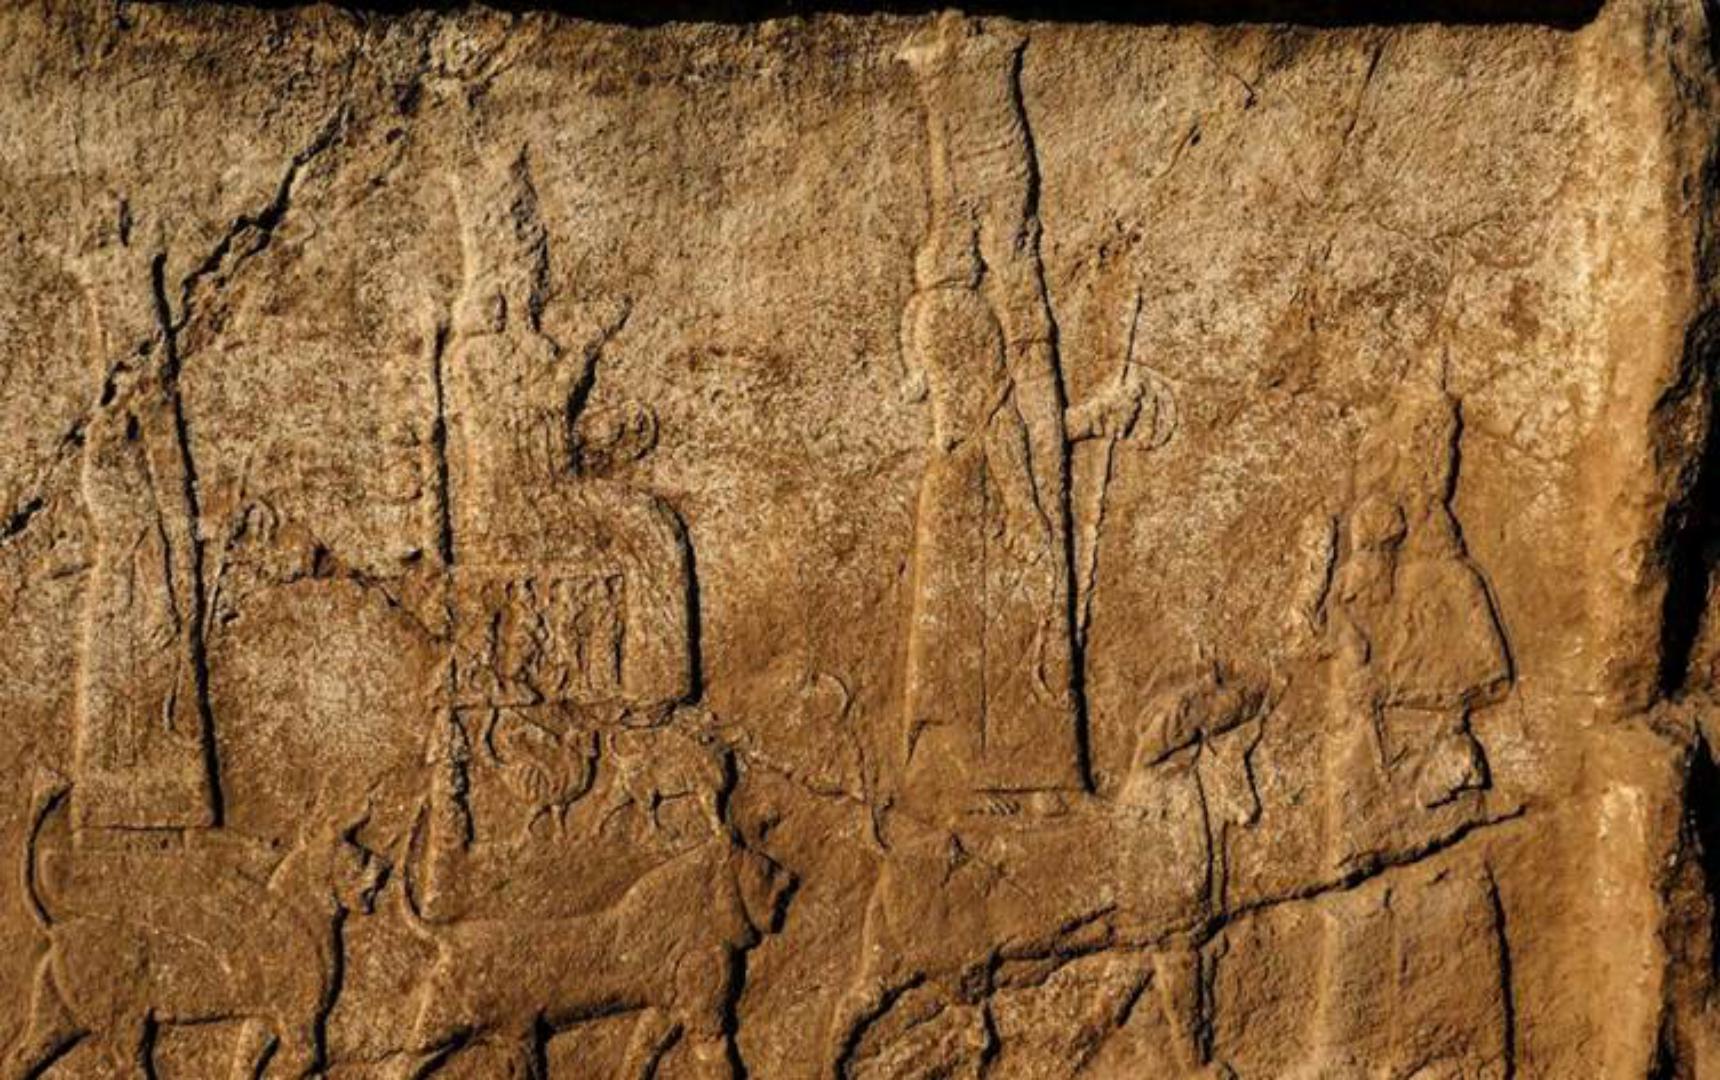  The carvings, from 2,700 years ago, show gods, kings and sacred animals - Terra Di Ninive/AFP